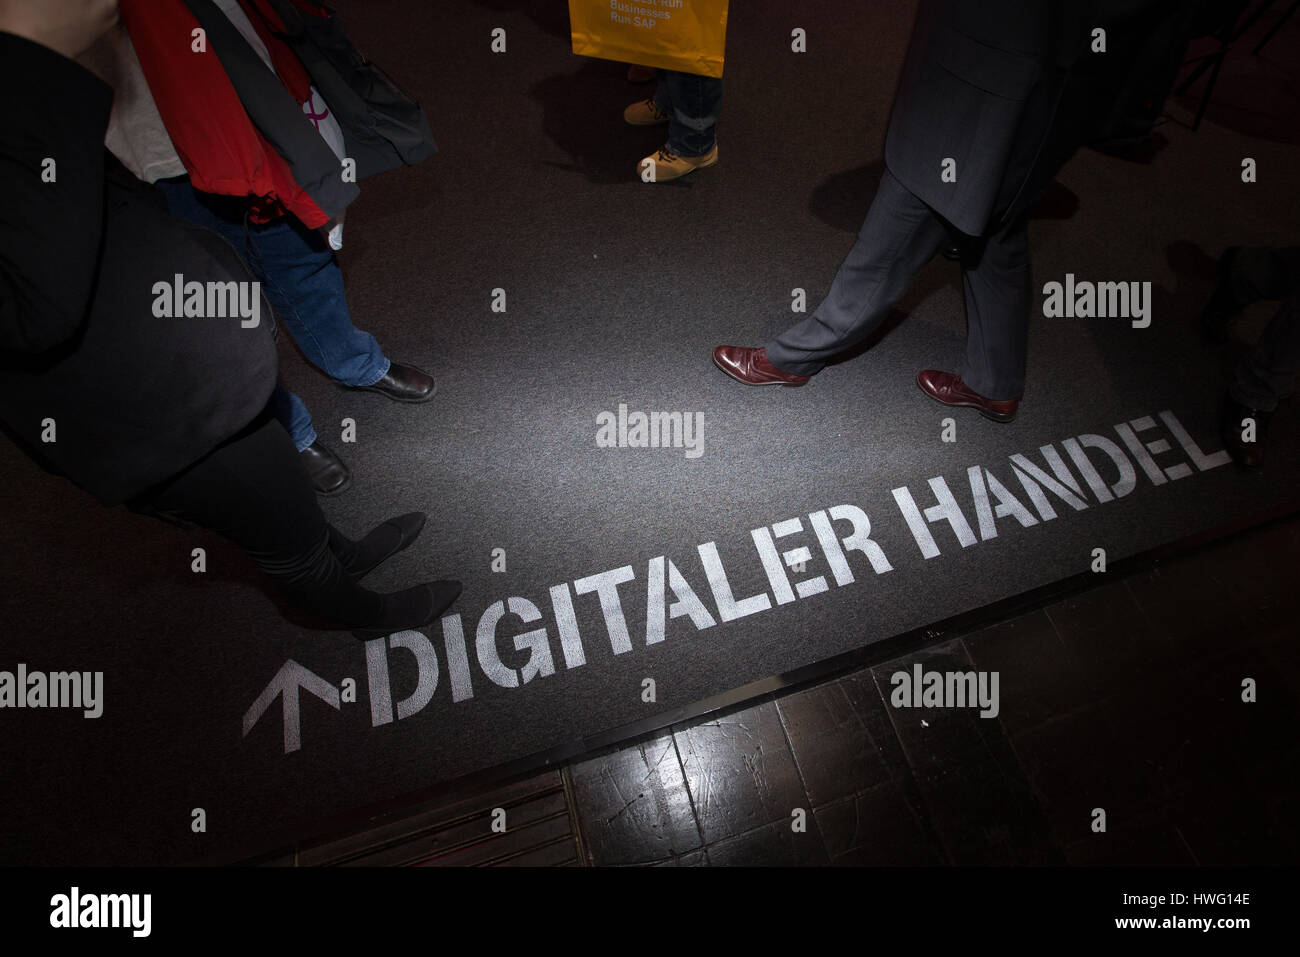 Hanover, Germany. 21st Mar, 2017. 'Digitaler Handel' (lit. 'Digital Trade') is written on the floor in order to advertise for the new services at the stand of the Telekom at the IT fair CeBIT in Hanover, Germany, 21 March 2017. The IT fair CeBIT wants to impress its expert audience with concrete application of new technology. The five day long trade fair (20 - 24 March) with more than 3000 exhibitors from 70 countries awaits approx. 200,000 visitors. The partner nation is Japan. Photo: Friso Gentsch/dpa/Alamy Live News Stock Photo